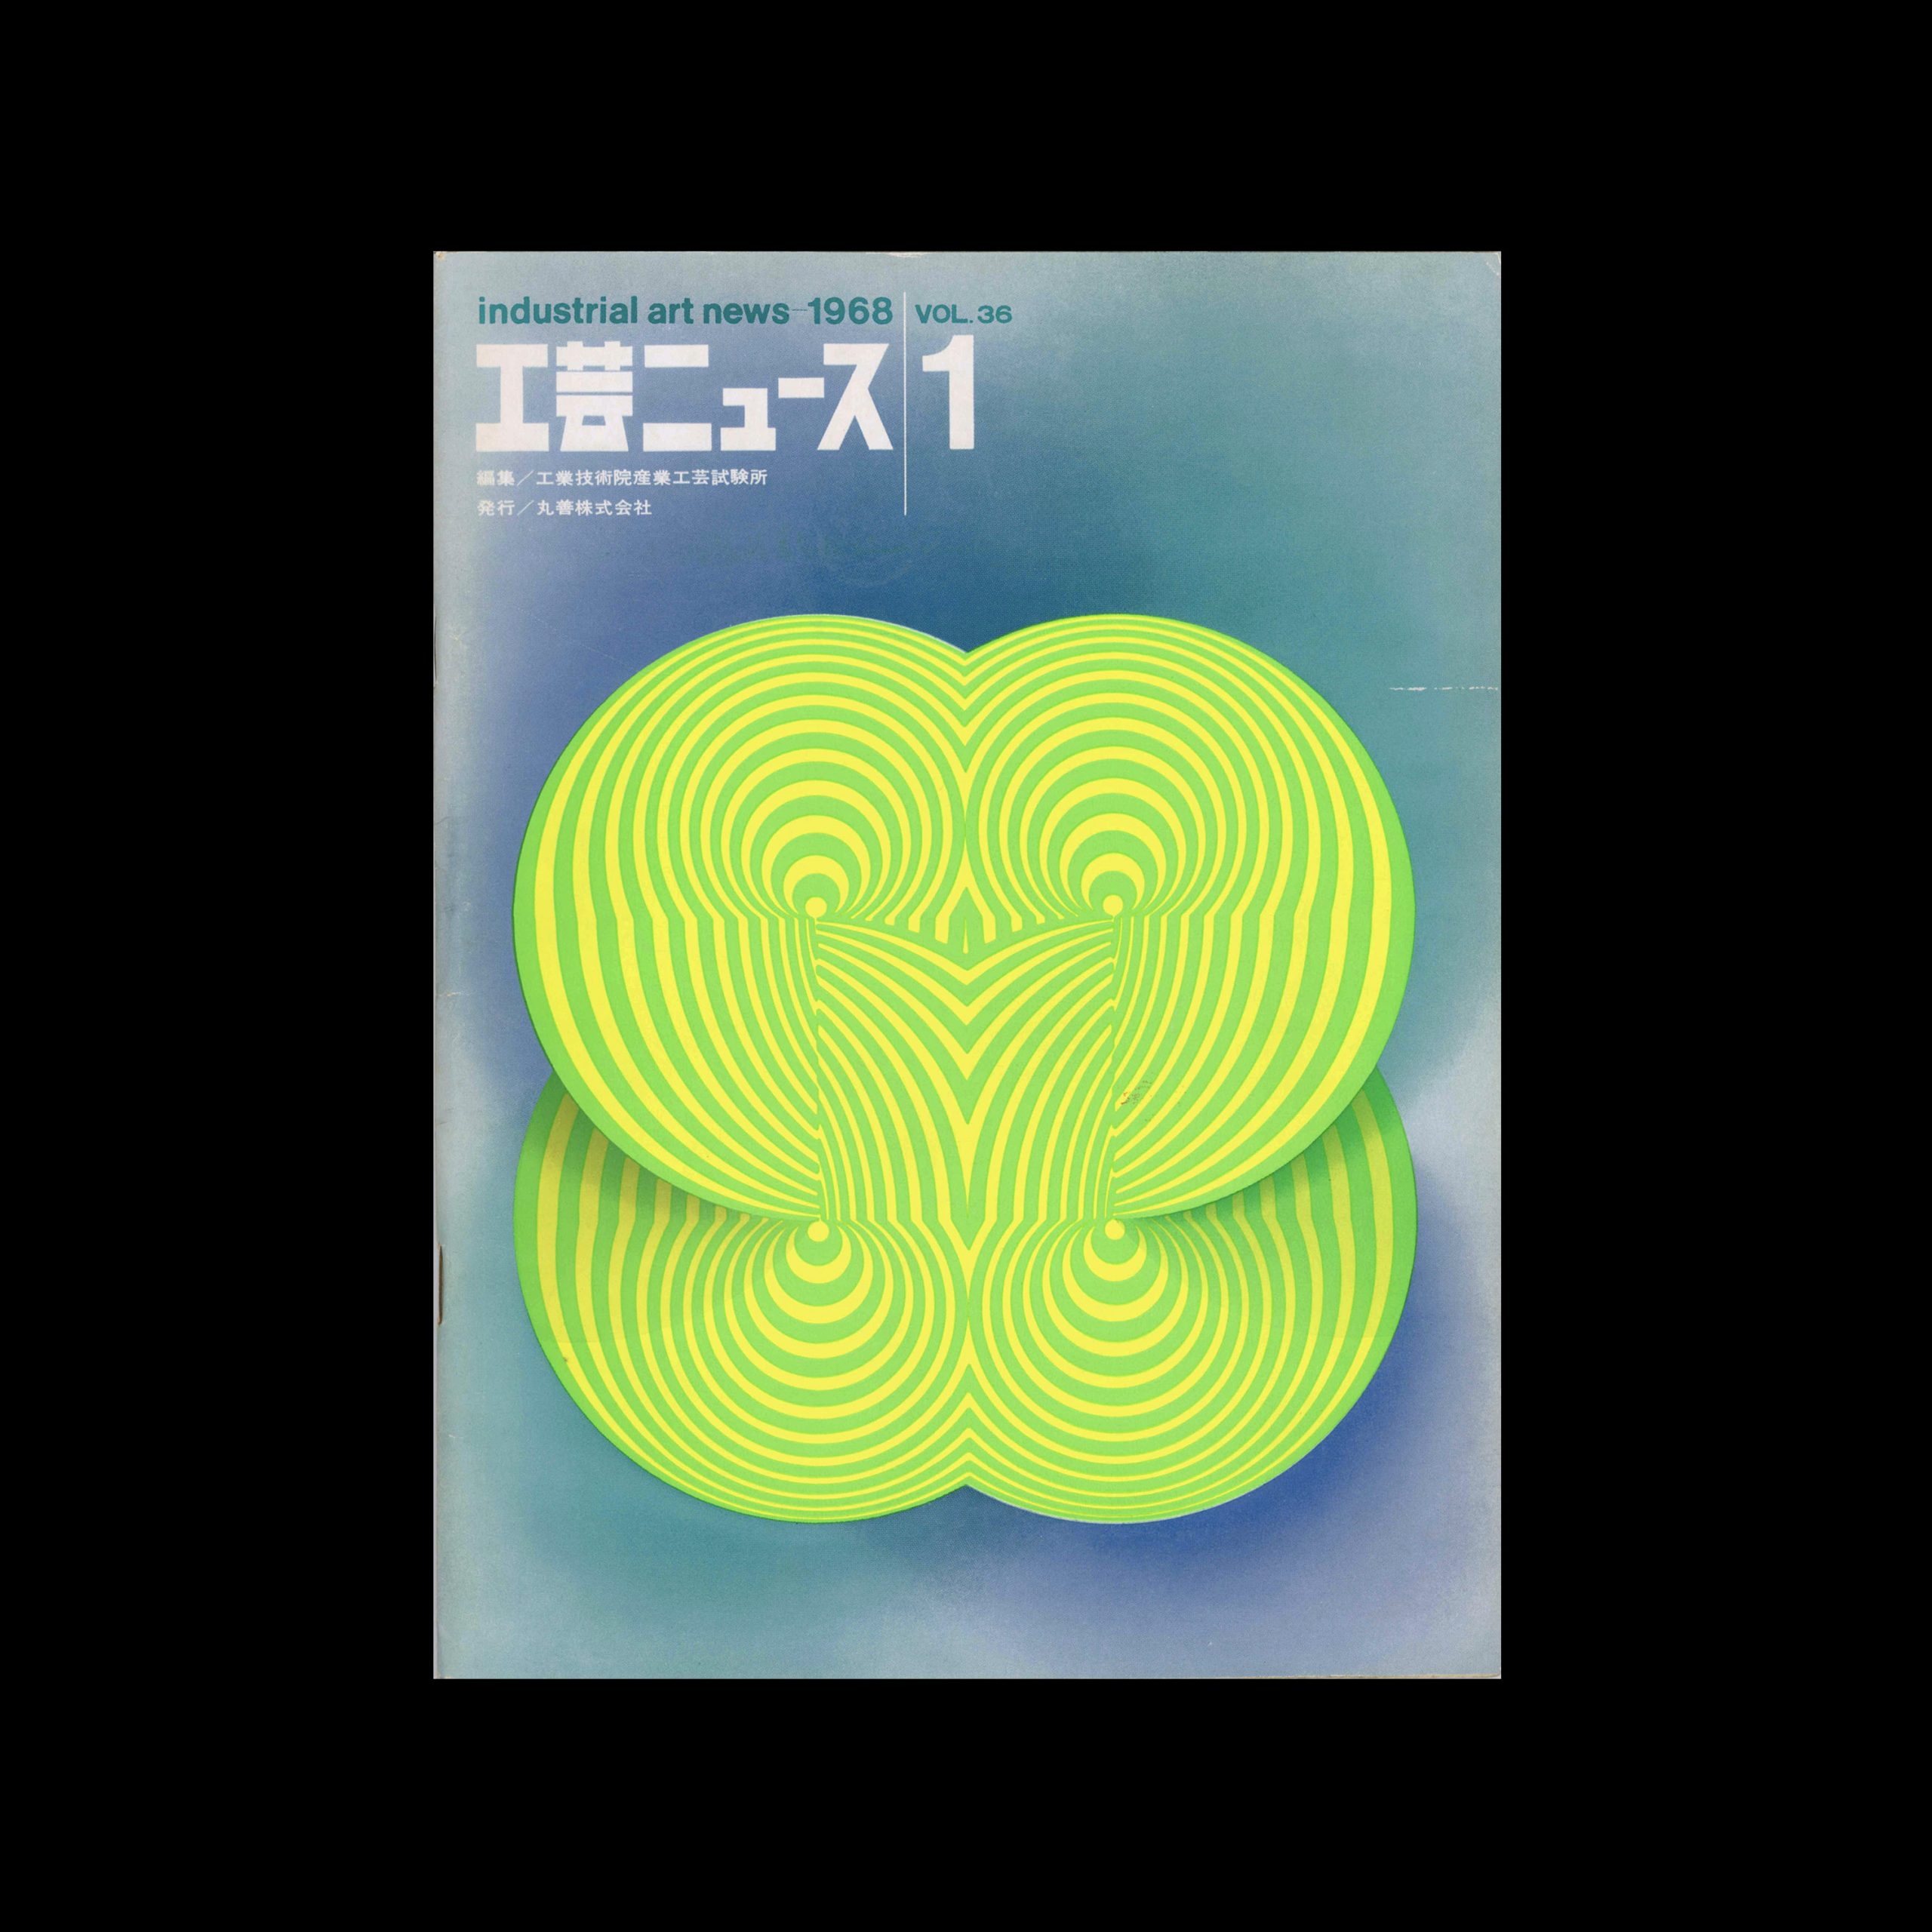 Industrial Art News – Vol. 36, No. 1, 1968. Cover design by Mitsuo Katsui